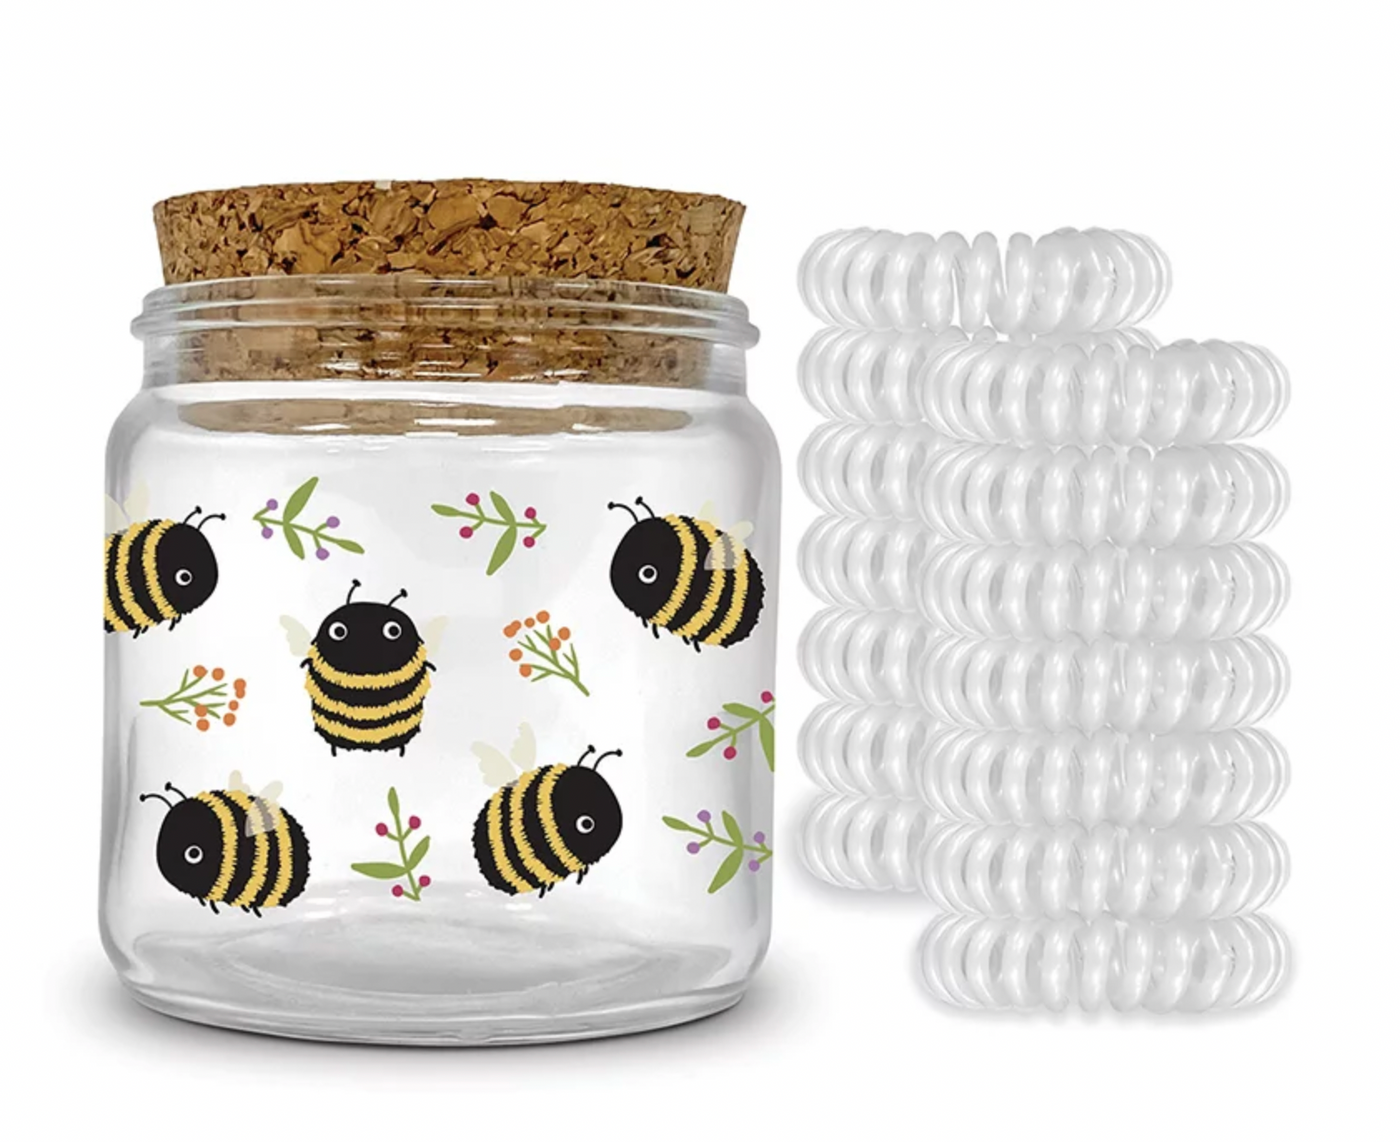 Spiral Hair Ties in Decorative Jars - Buzzy Bees